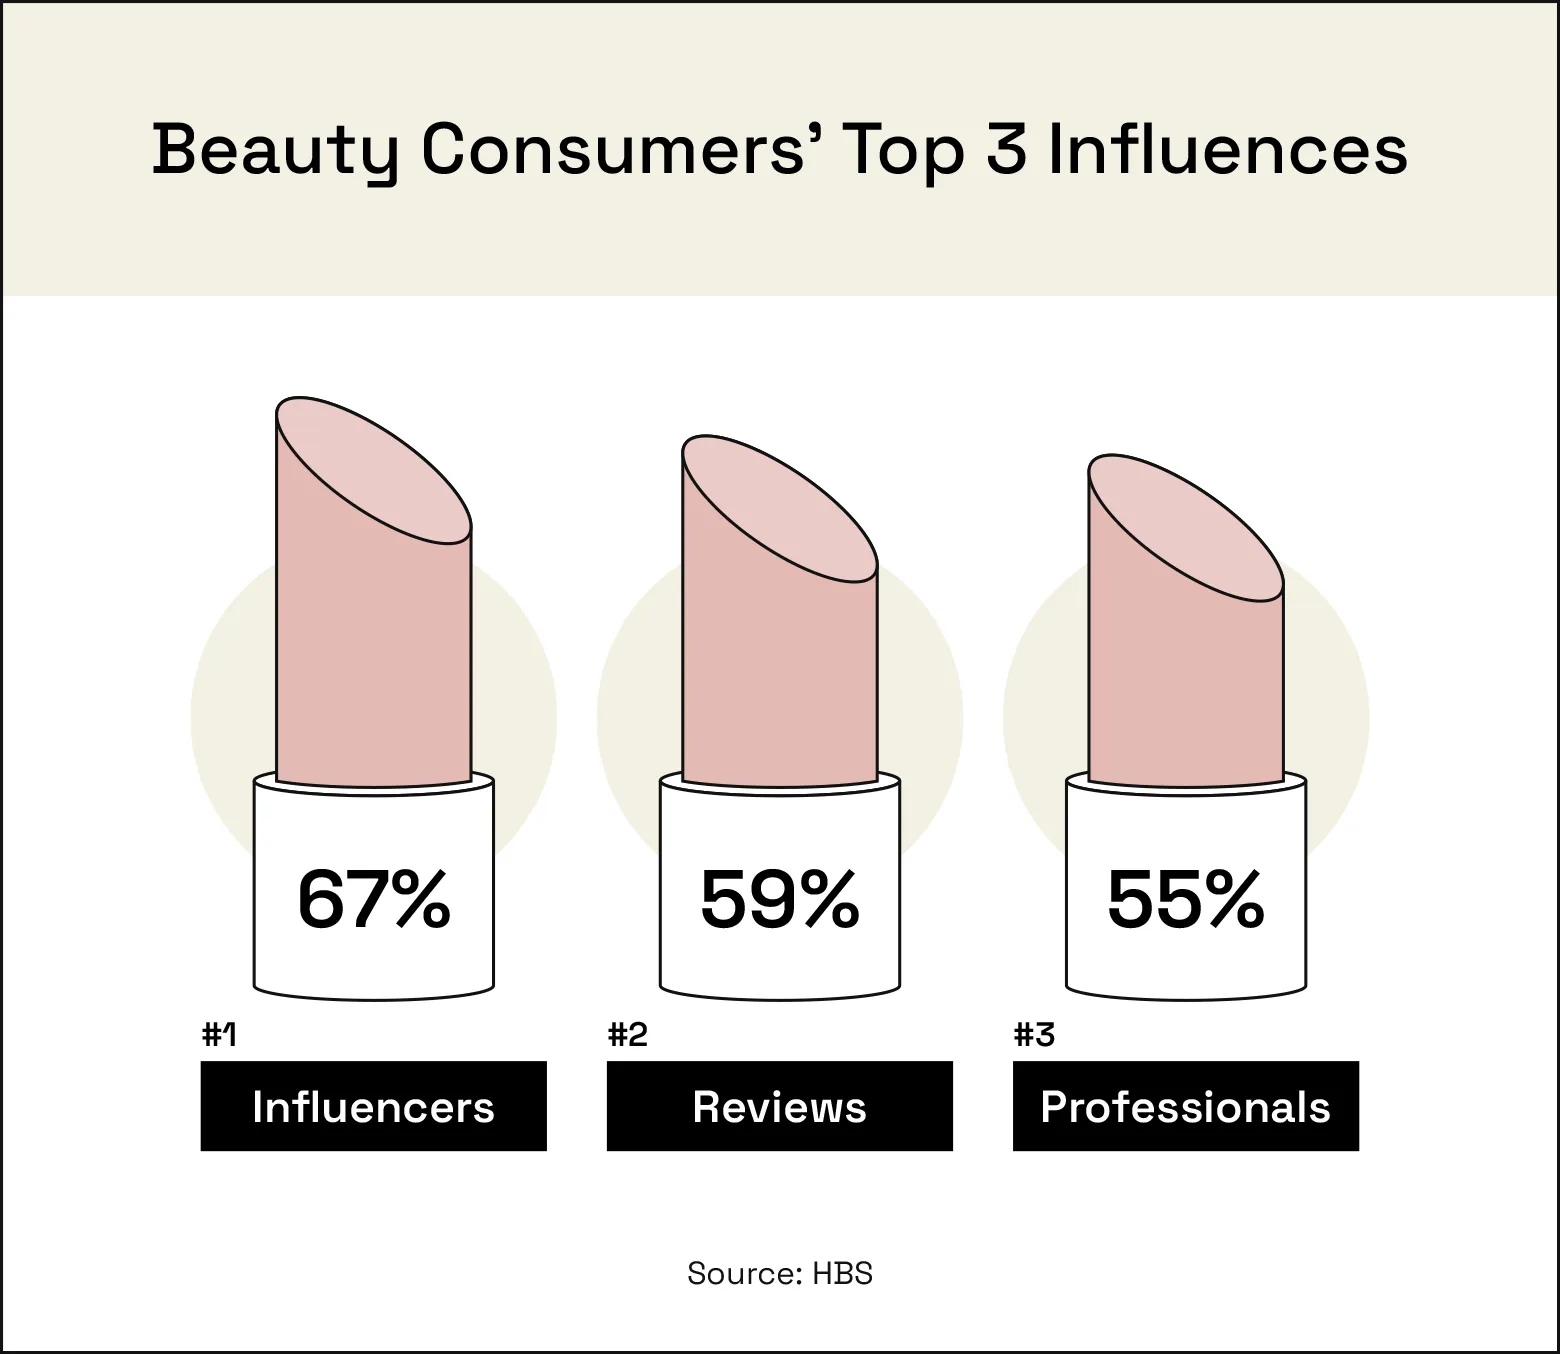 Consumers’ top three influences are influencers, reviews, and professionals.